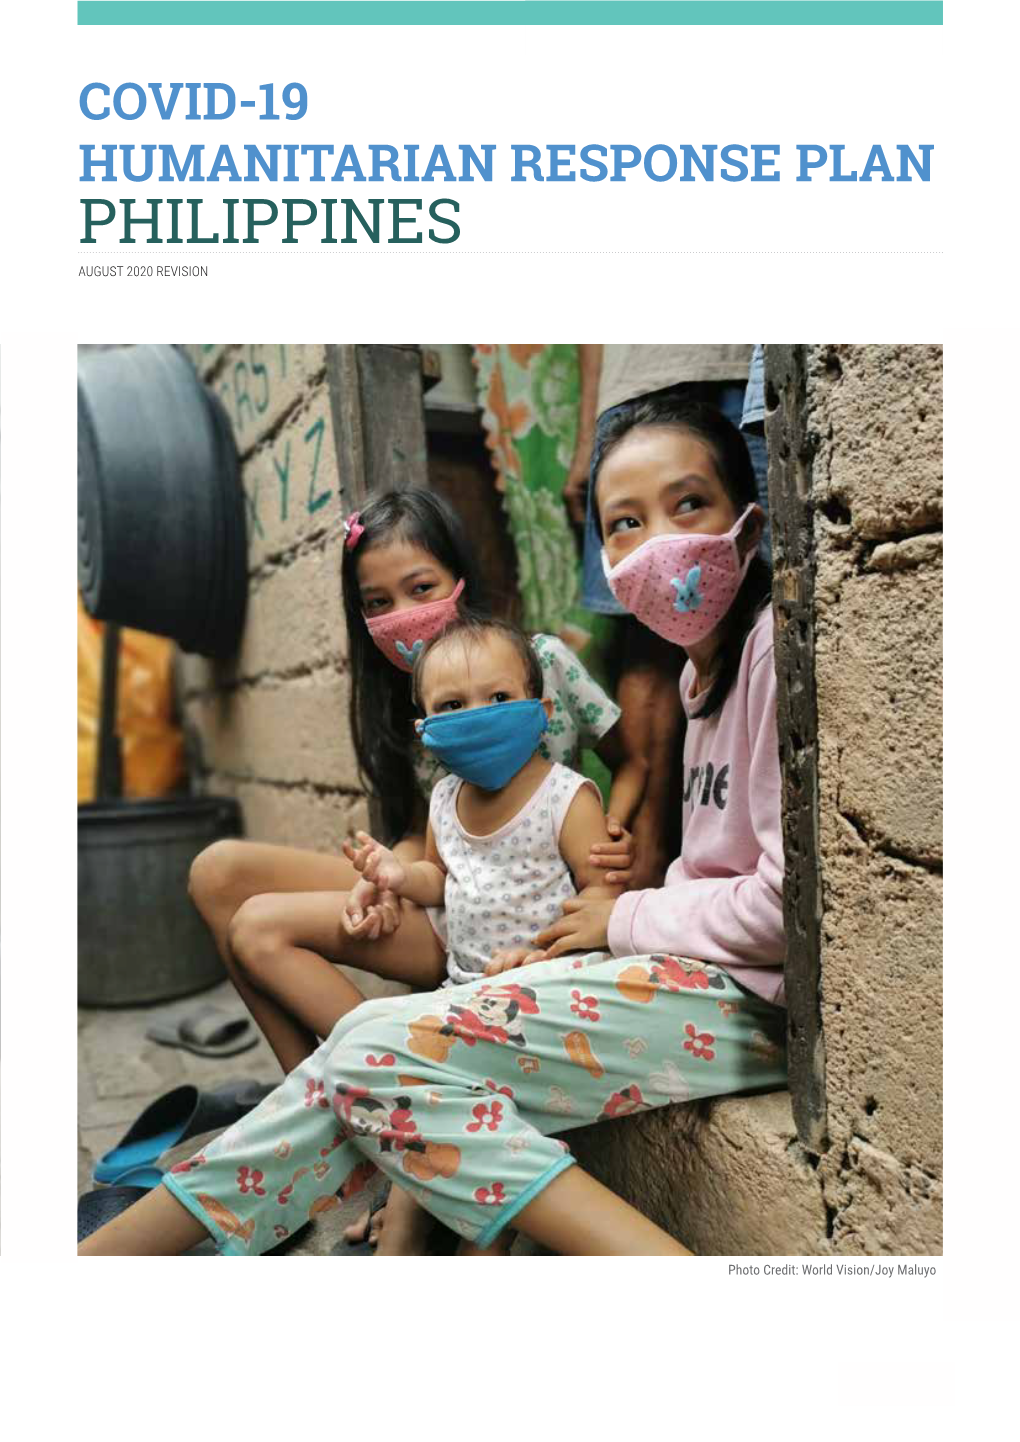 COVID-19 Humanitarian Response Plan for the Philippines